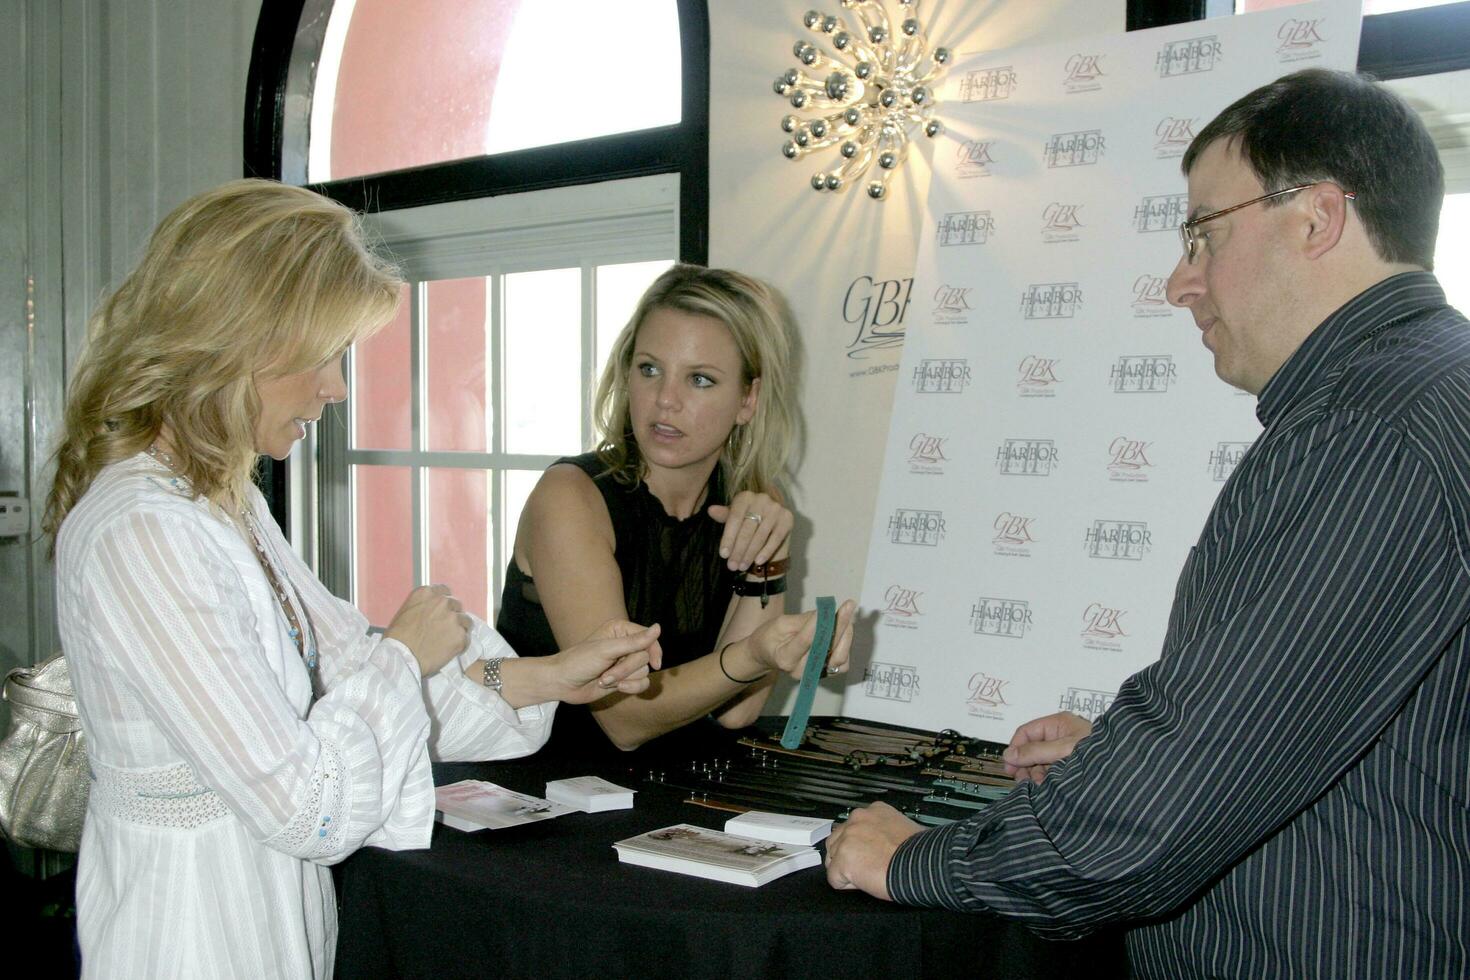 Cheryl Hines GBK Emmy Gifting Suite Hollywood Roosevelt Hotel Los Angeles CA September 13 2007 2007 Kathy Hutchins Hutchins Photo